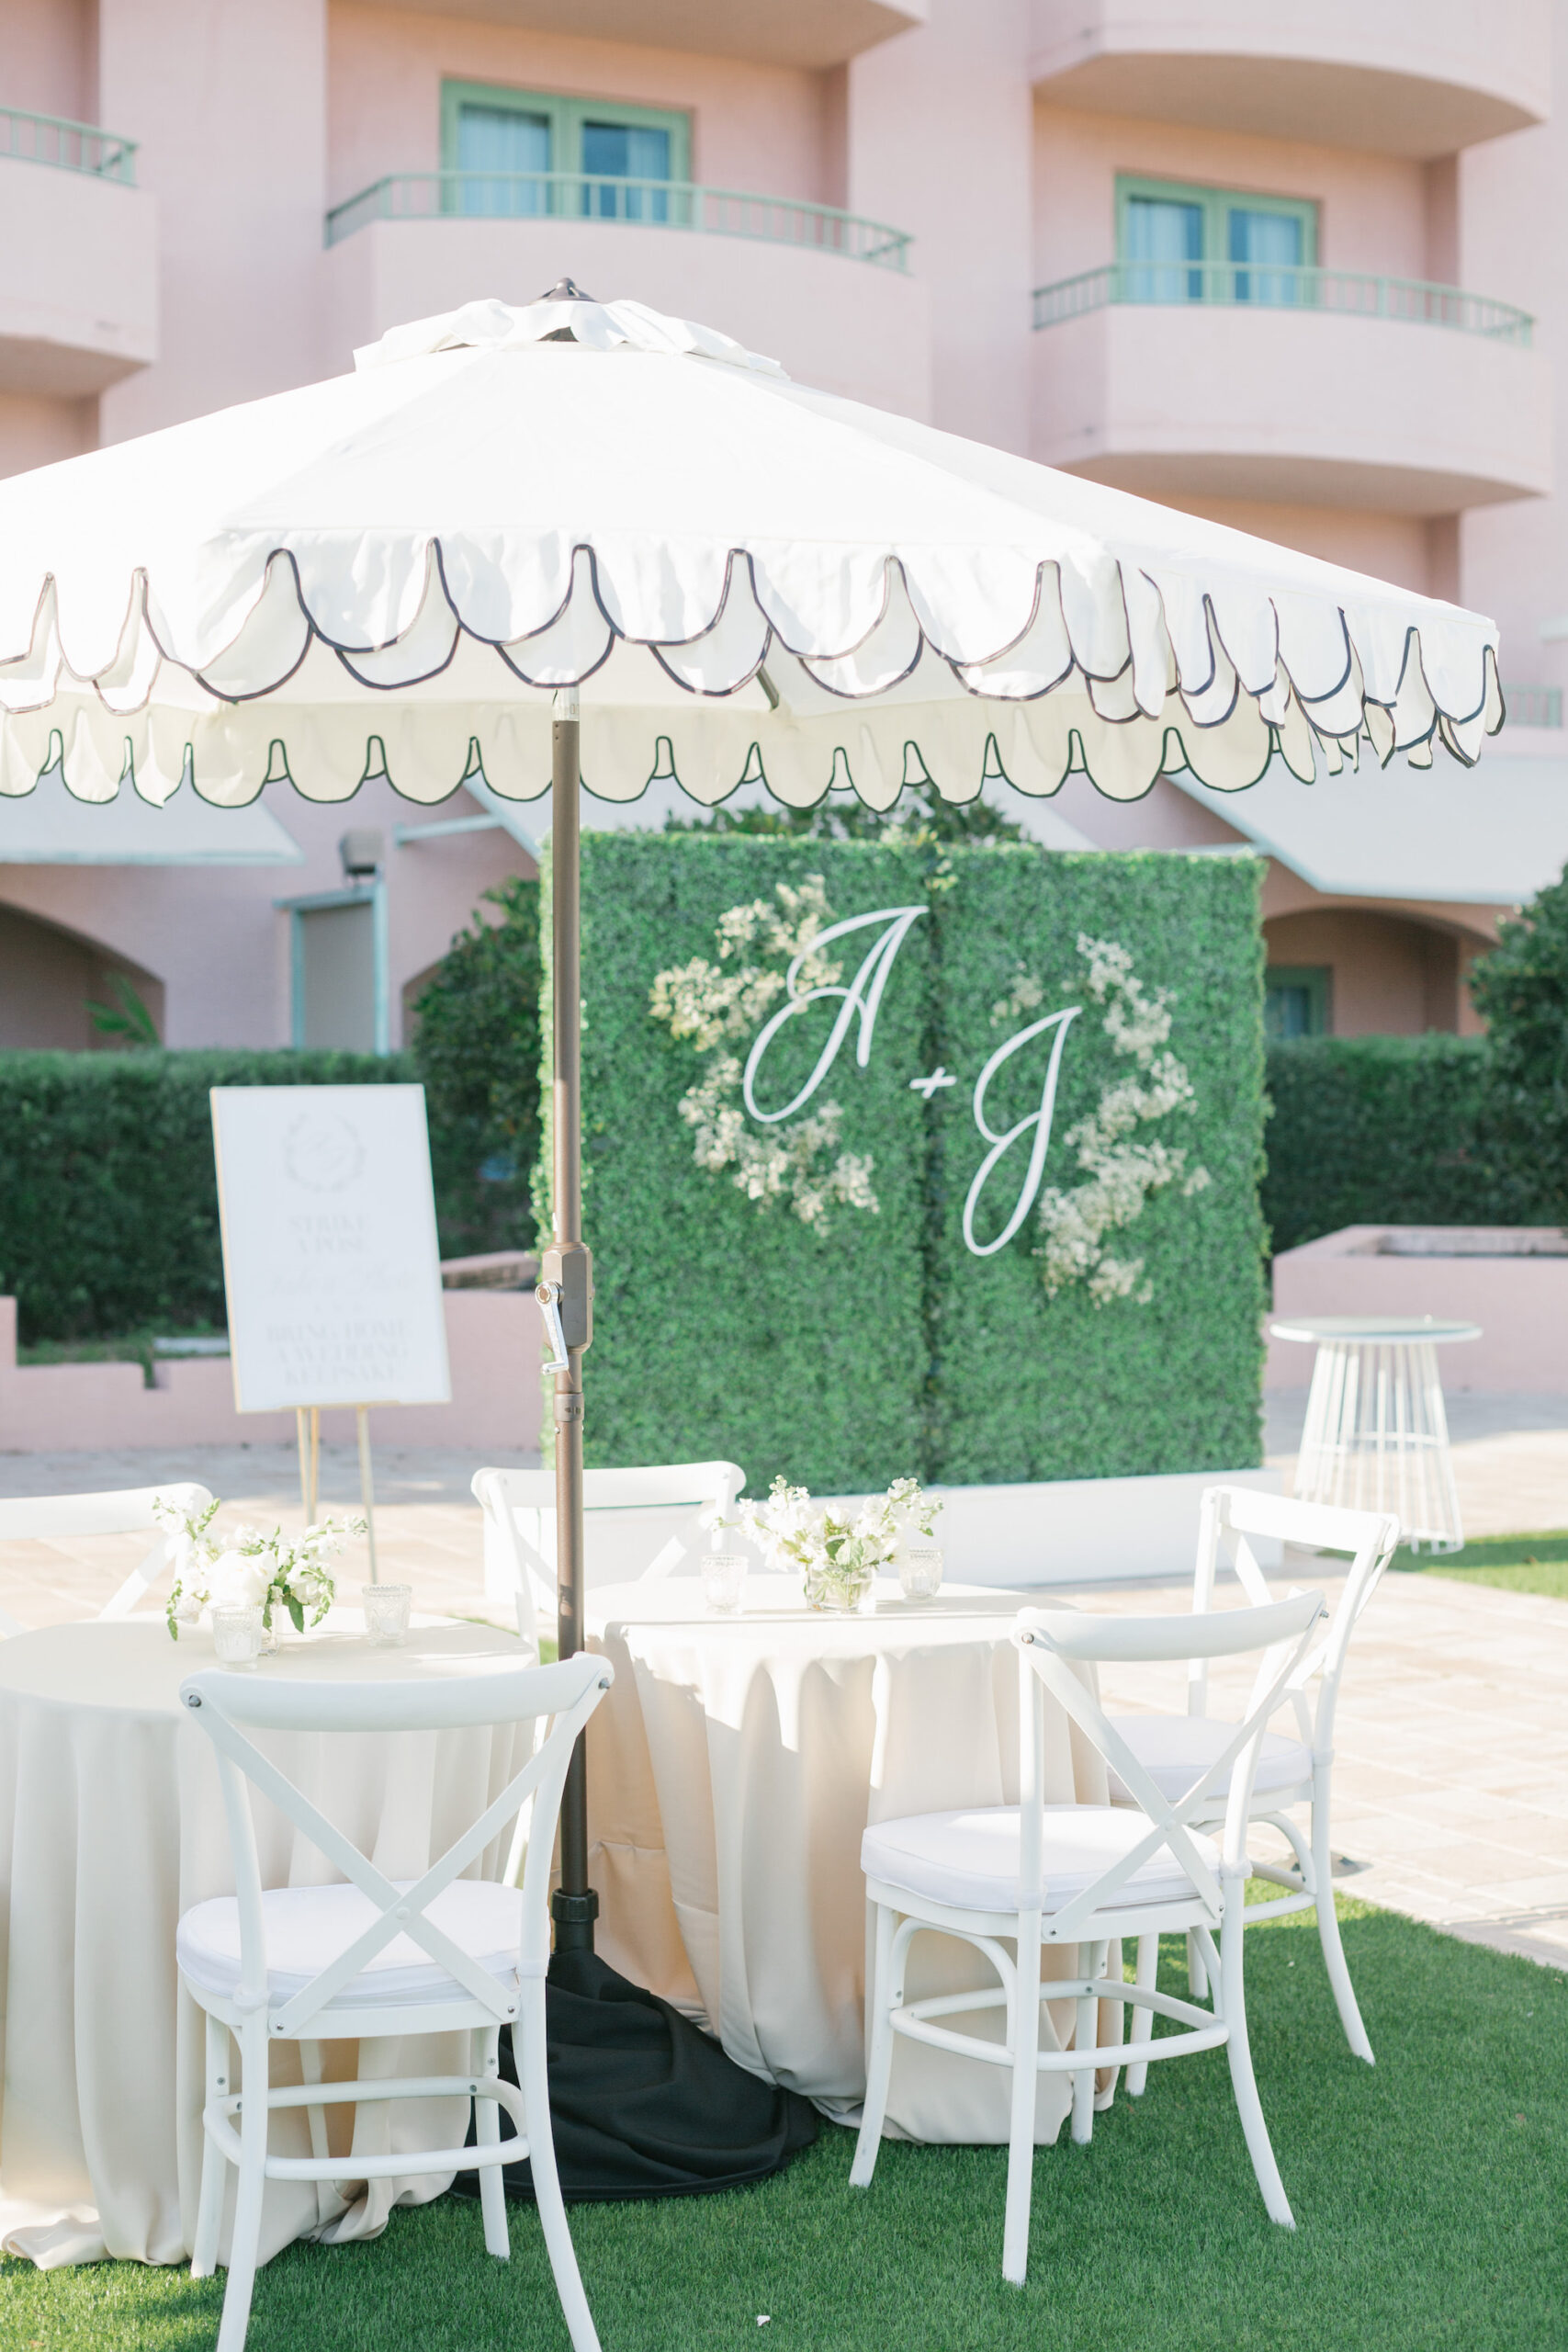 Outdoor Wedding Cocktail Hour | Greenery Wall with Bride and Groom Initials Decor Ideas